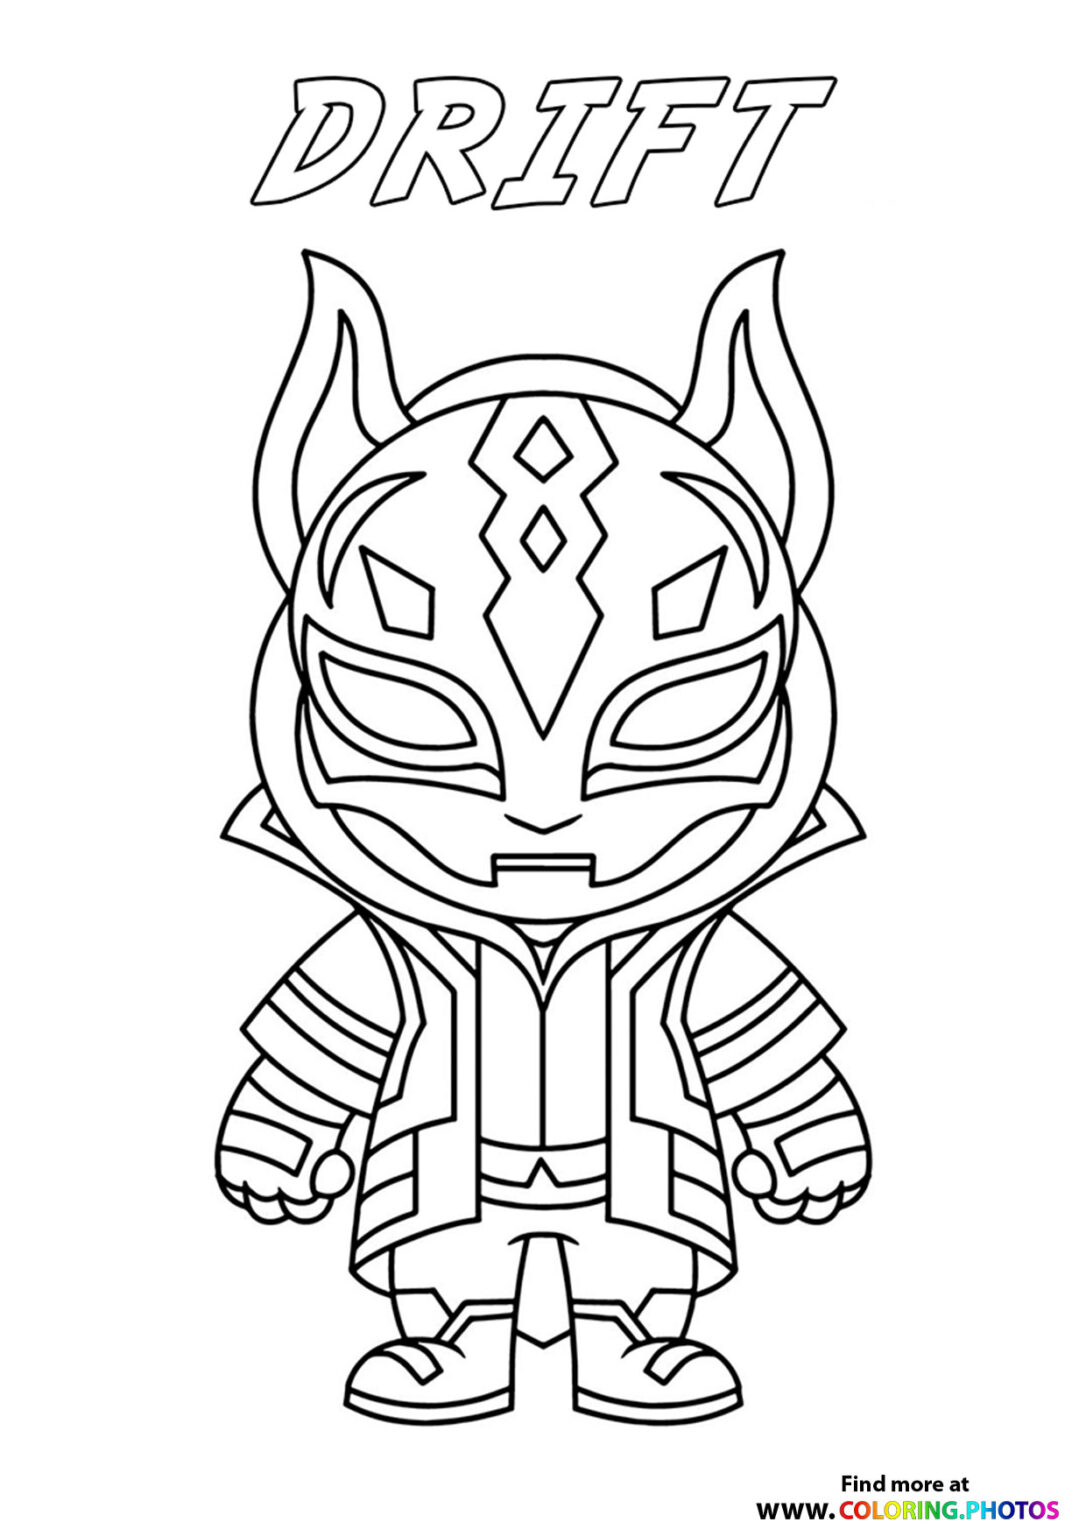 Abstrakt Fortnite Coloring Page Coloring Pages